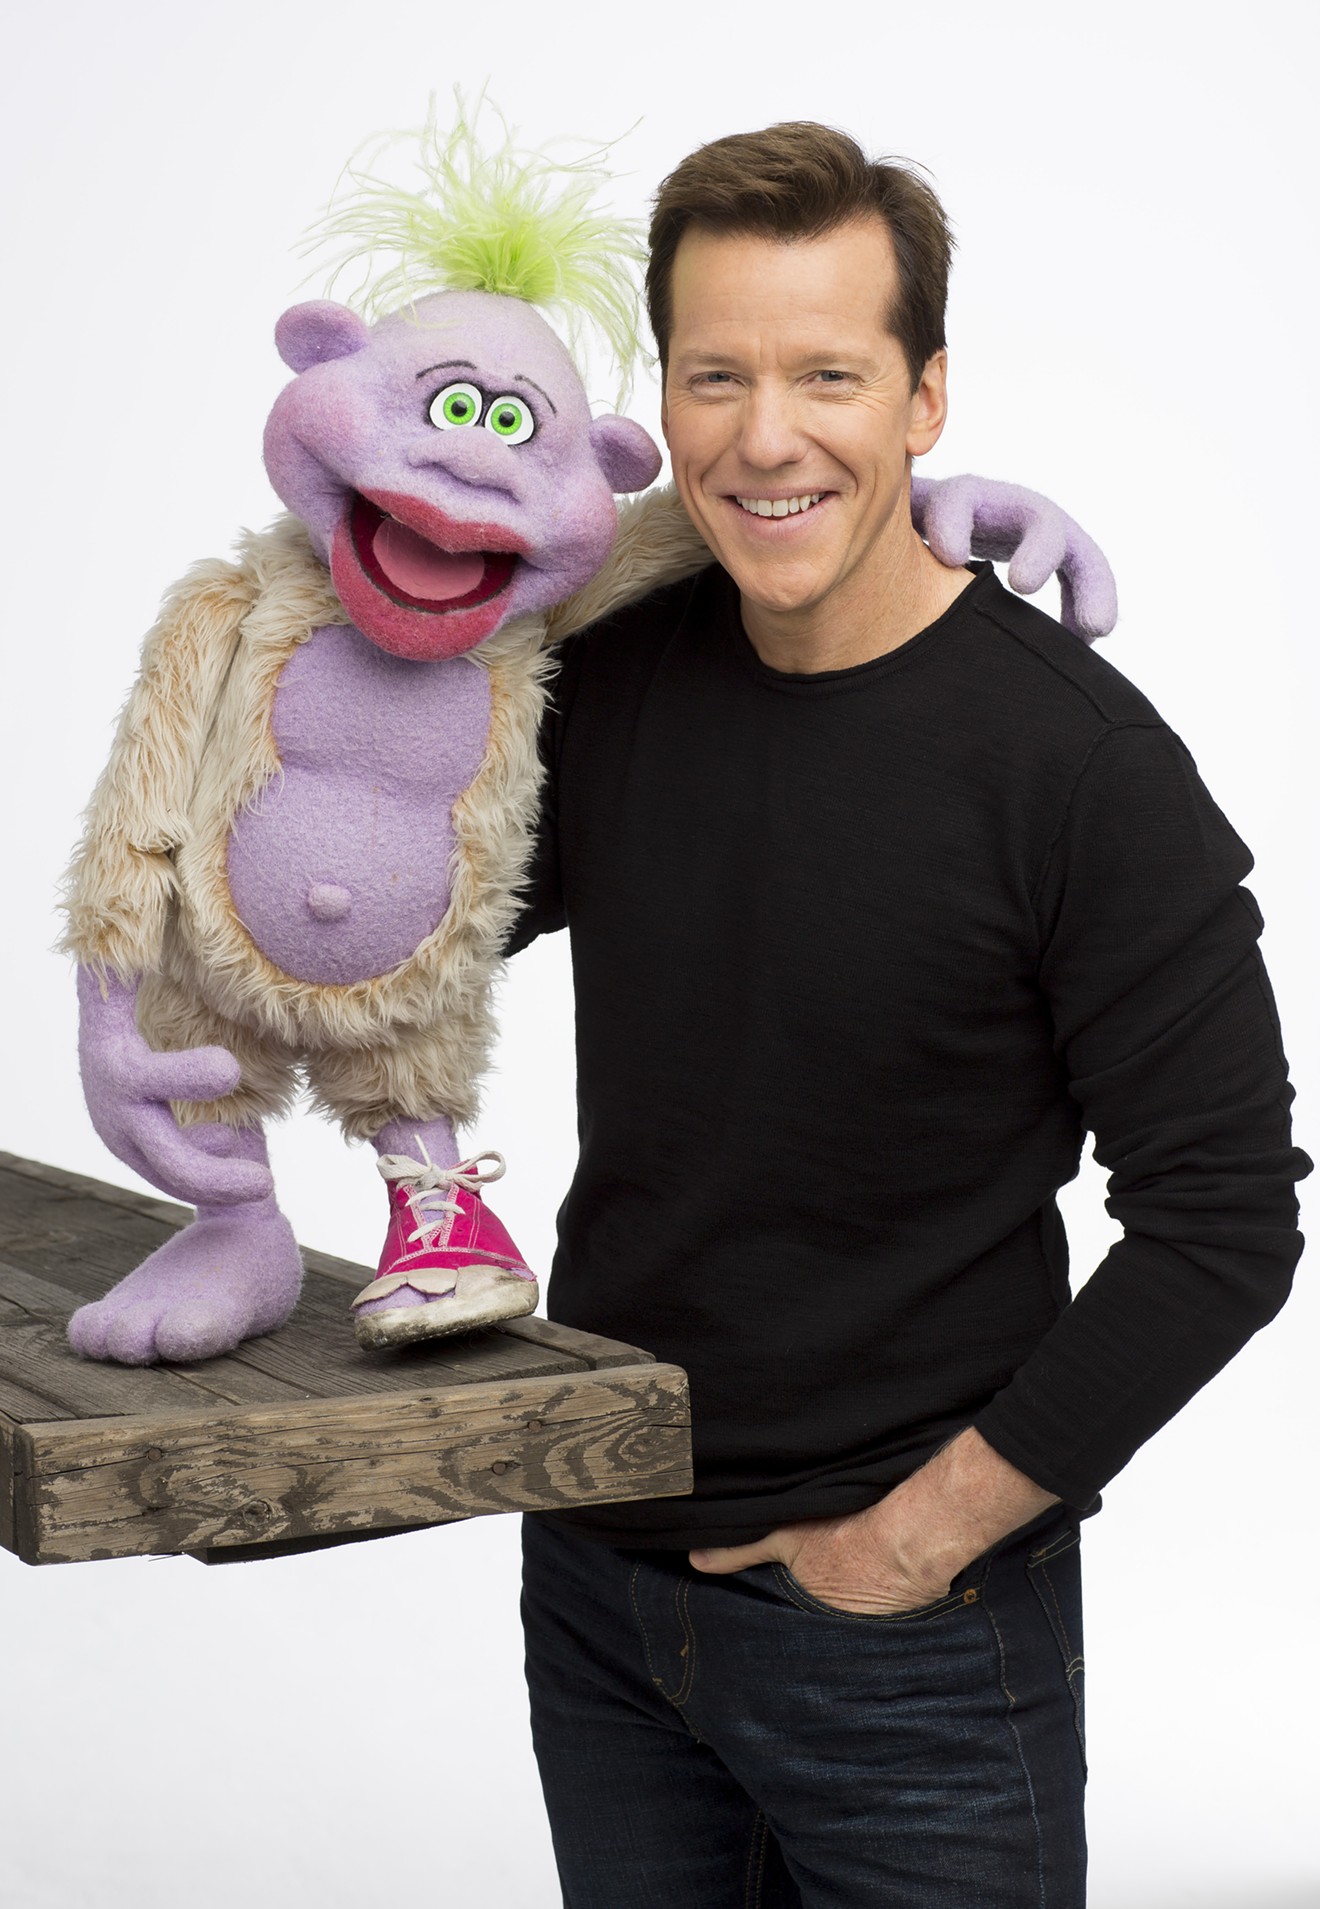 Comedian and ventriloquist Jeff Dunham with his friendly "woozle" Peanut